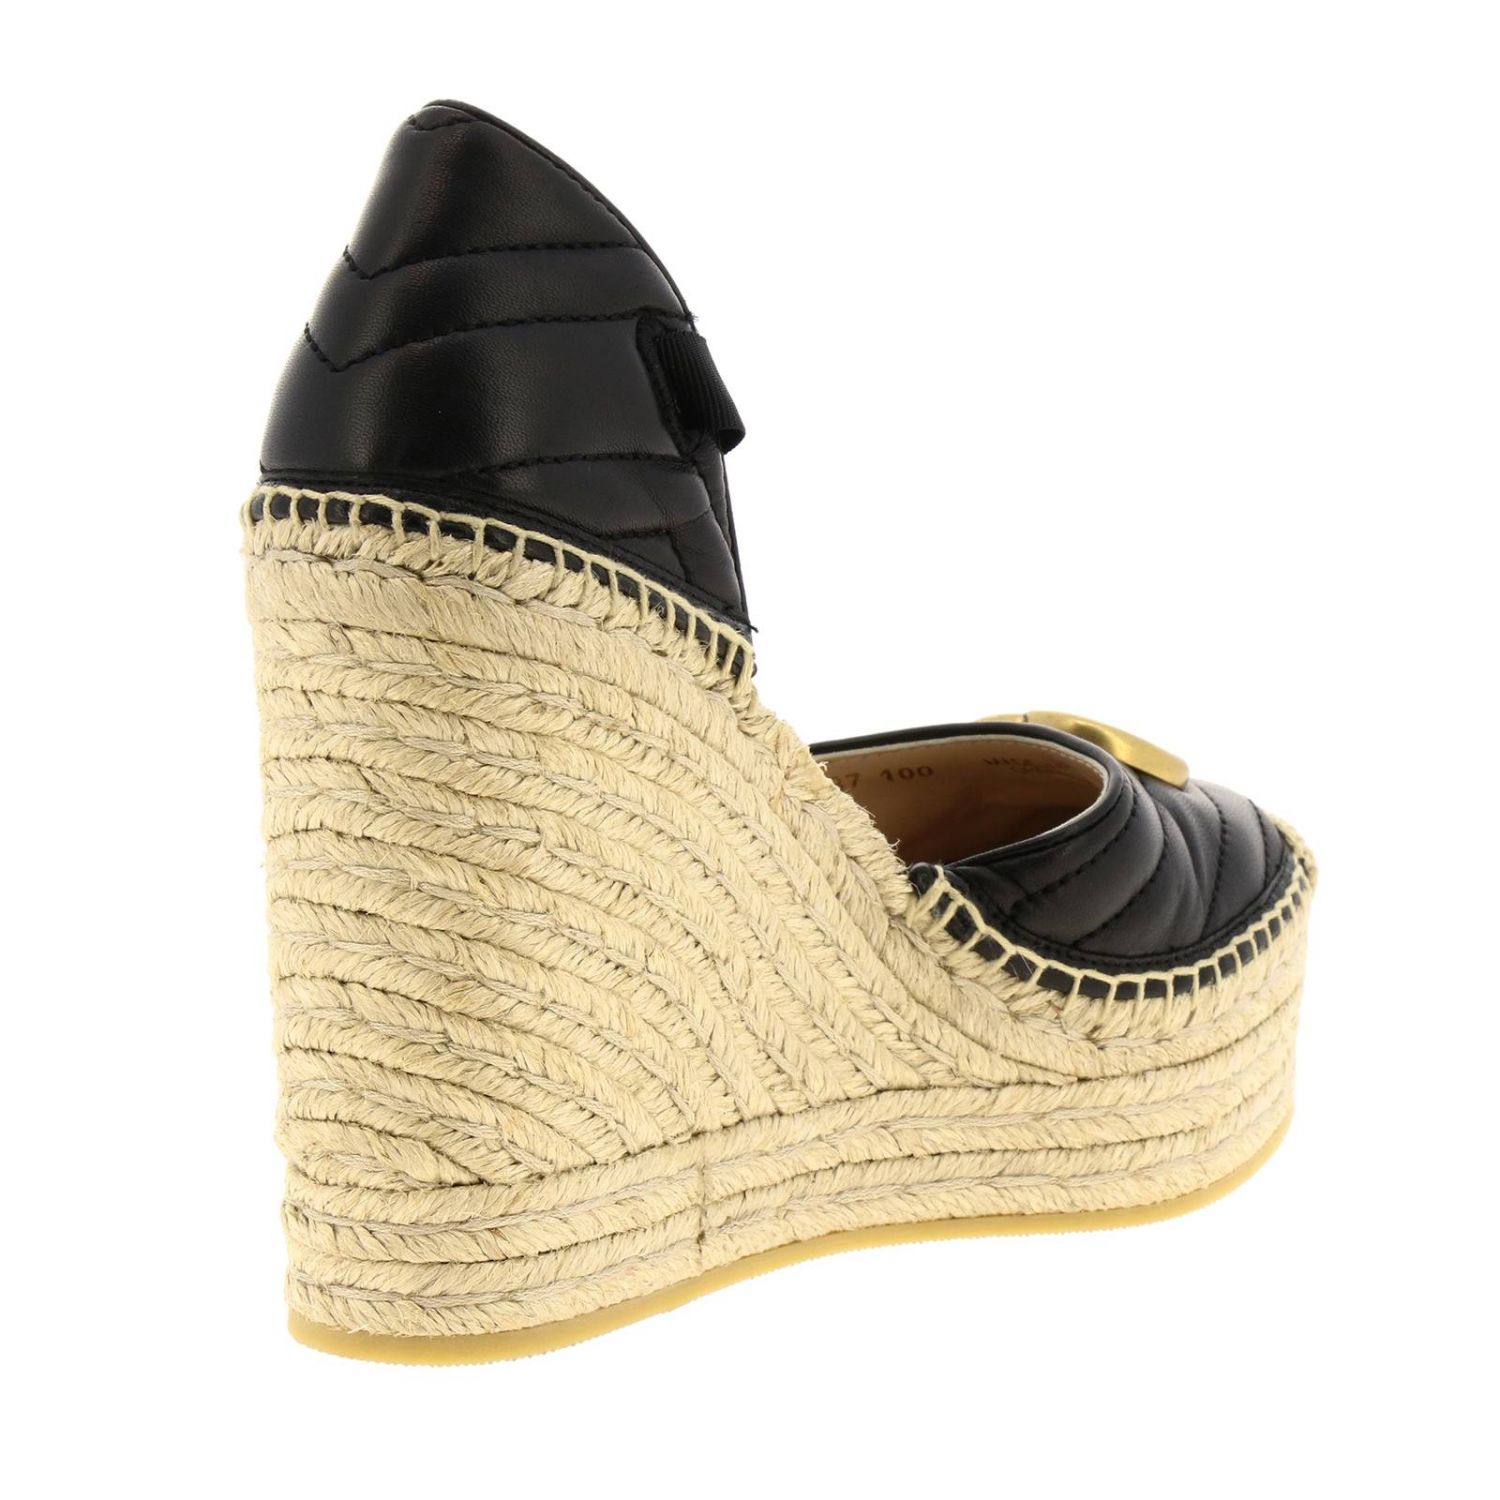 gucci women's wedge shoes